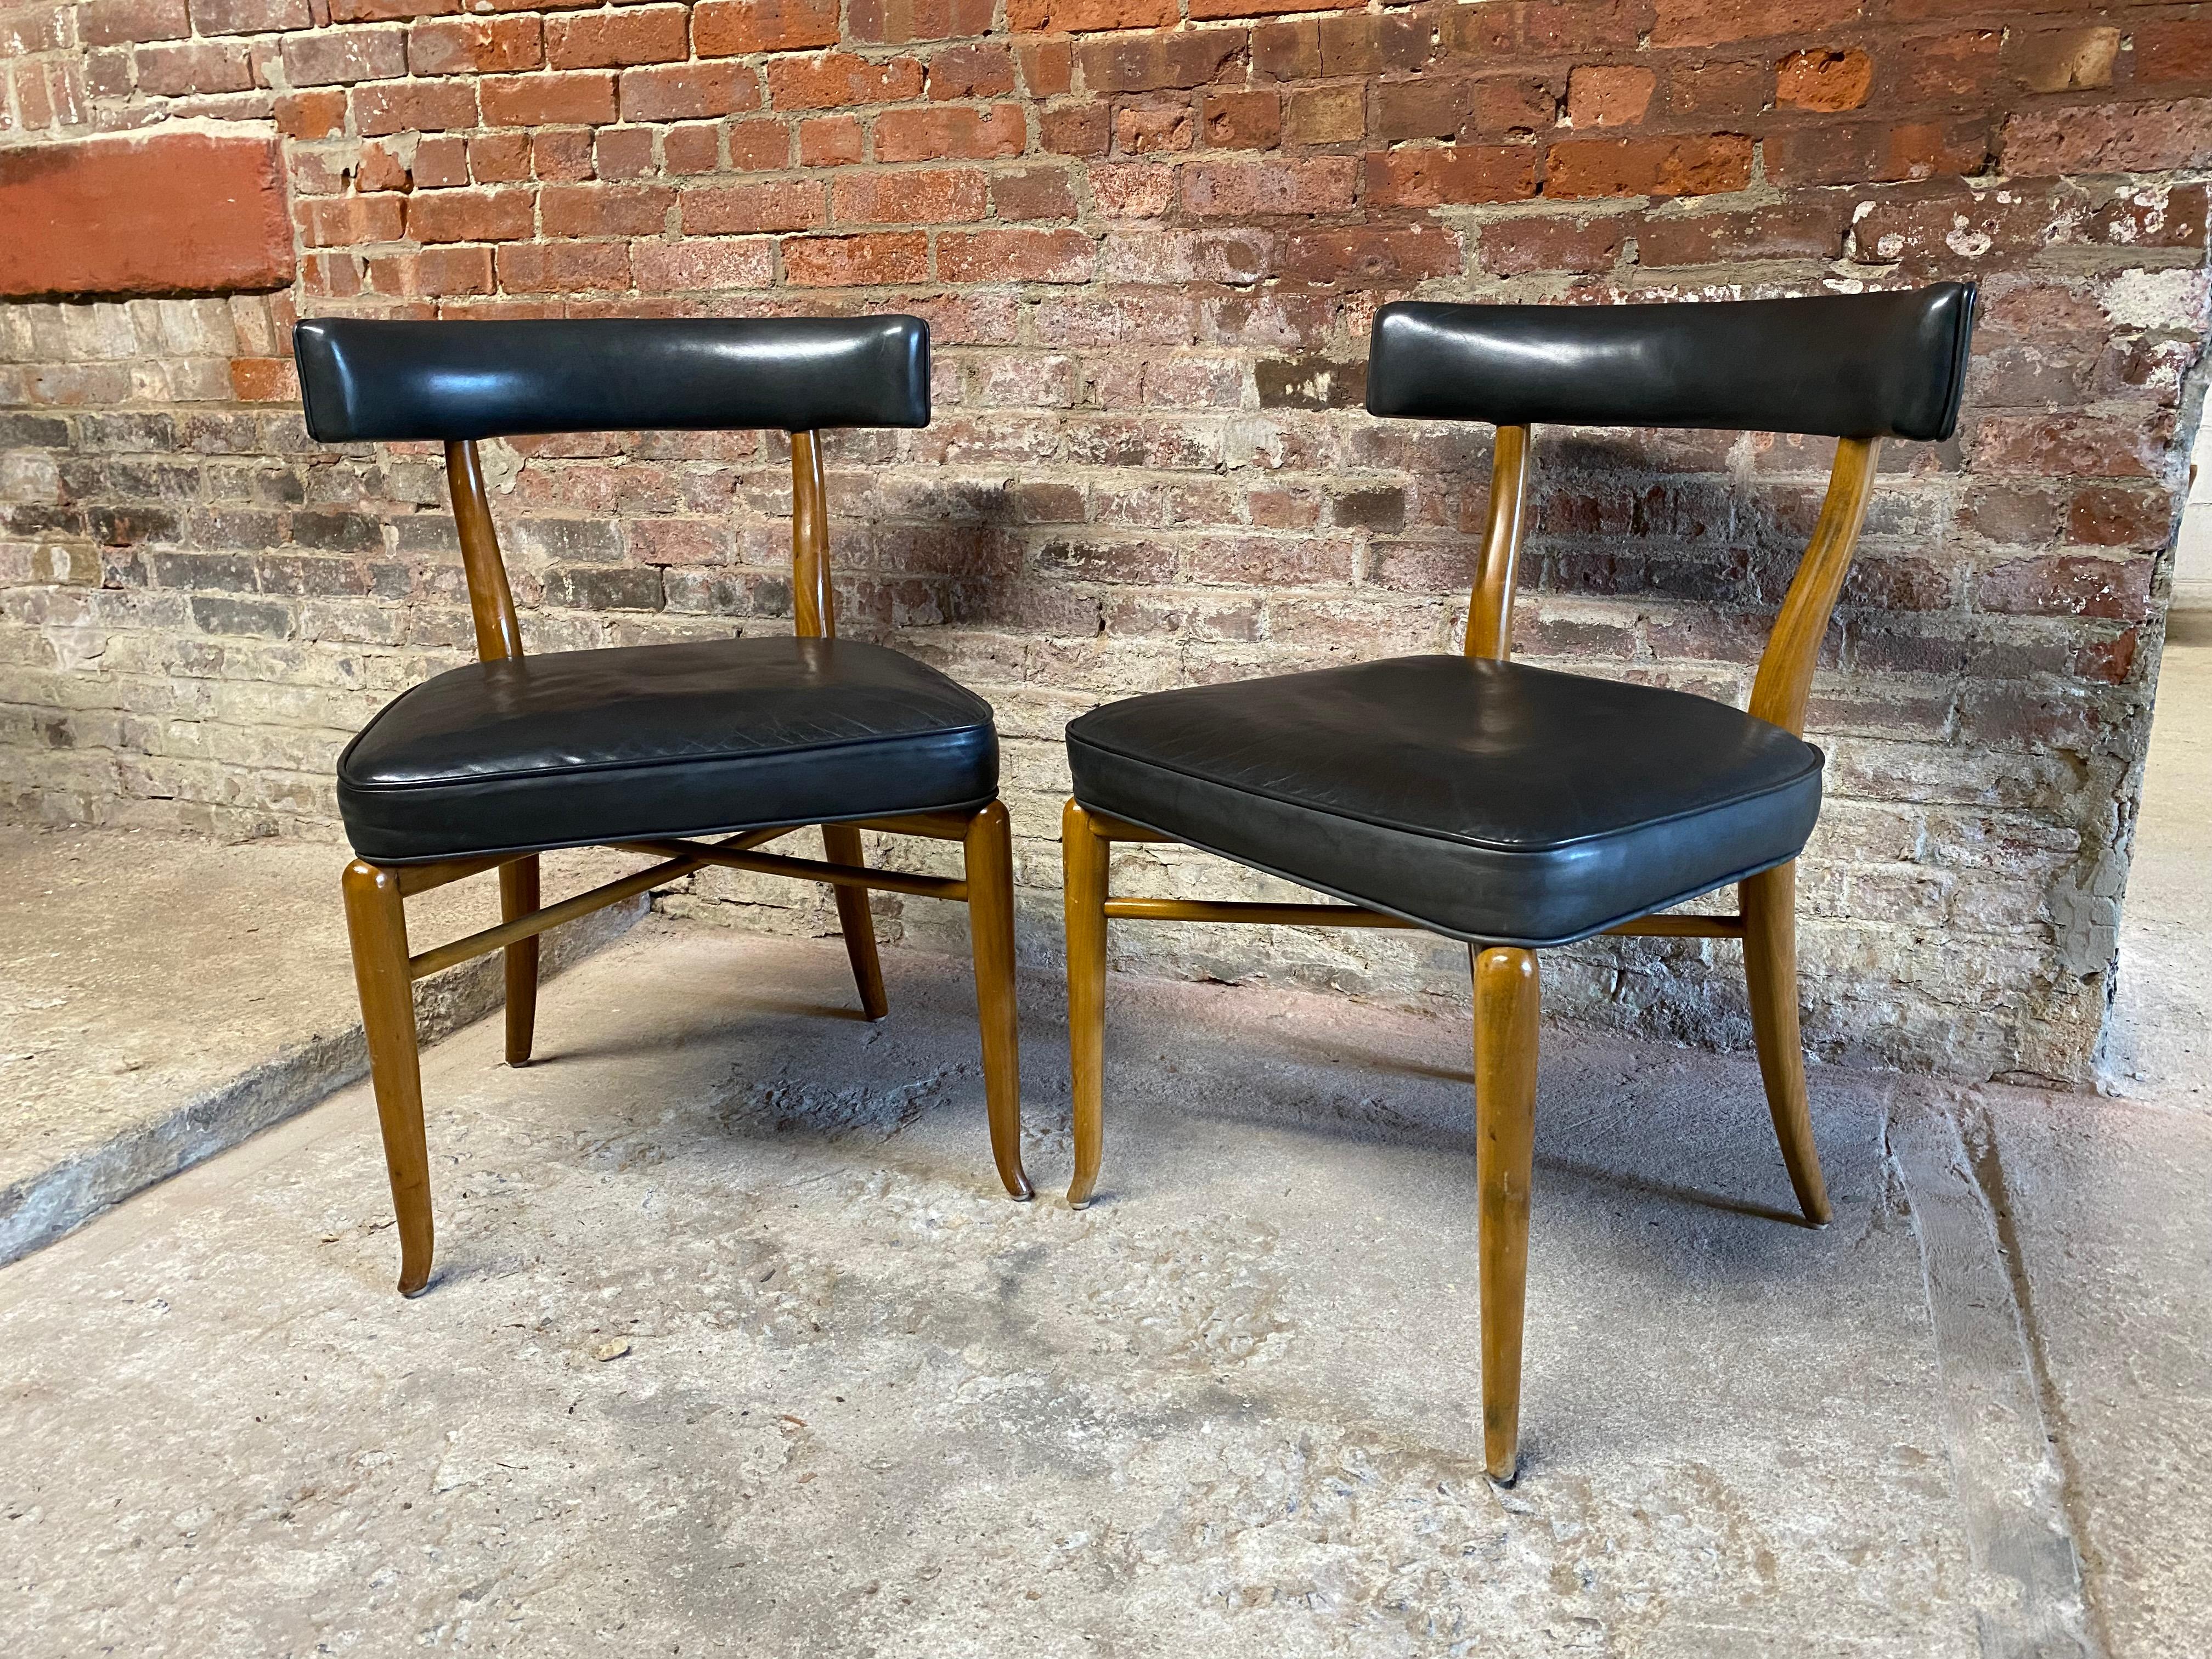 Gibbings design for Widdicomb. Featuring his curvaceous tapered leg and barrel backs. Circa 1950-60. Beautiful lyrical design. Leather backs and seats. The price is for the pair.

Measure approximately 22